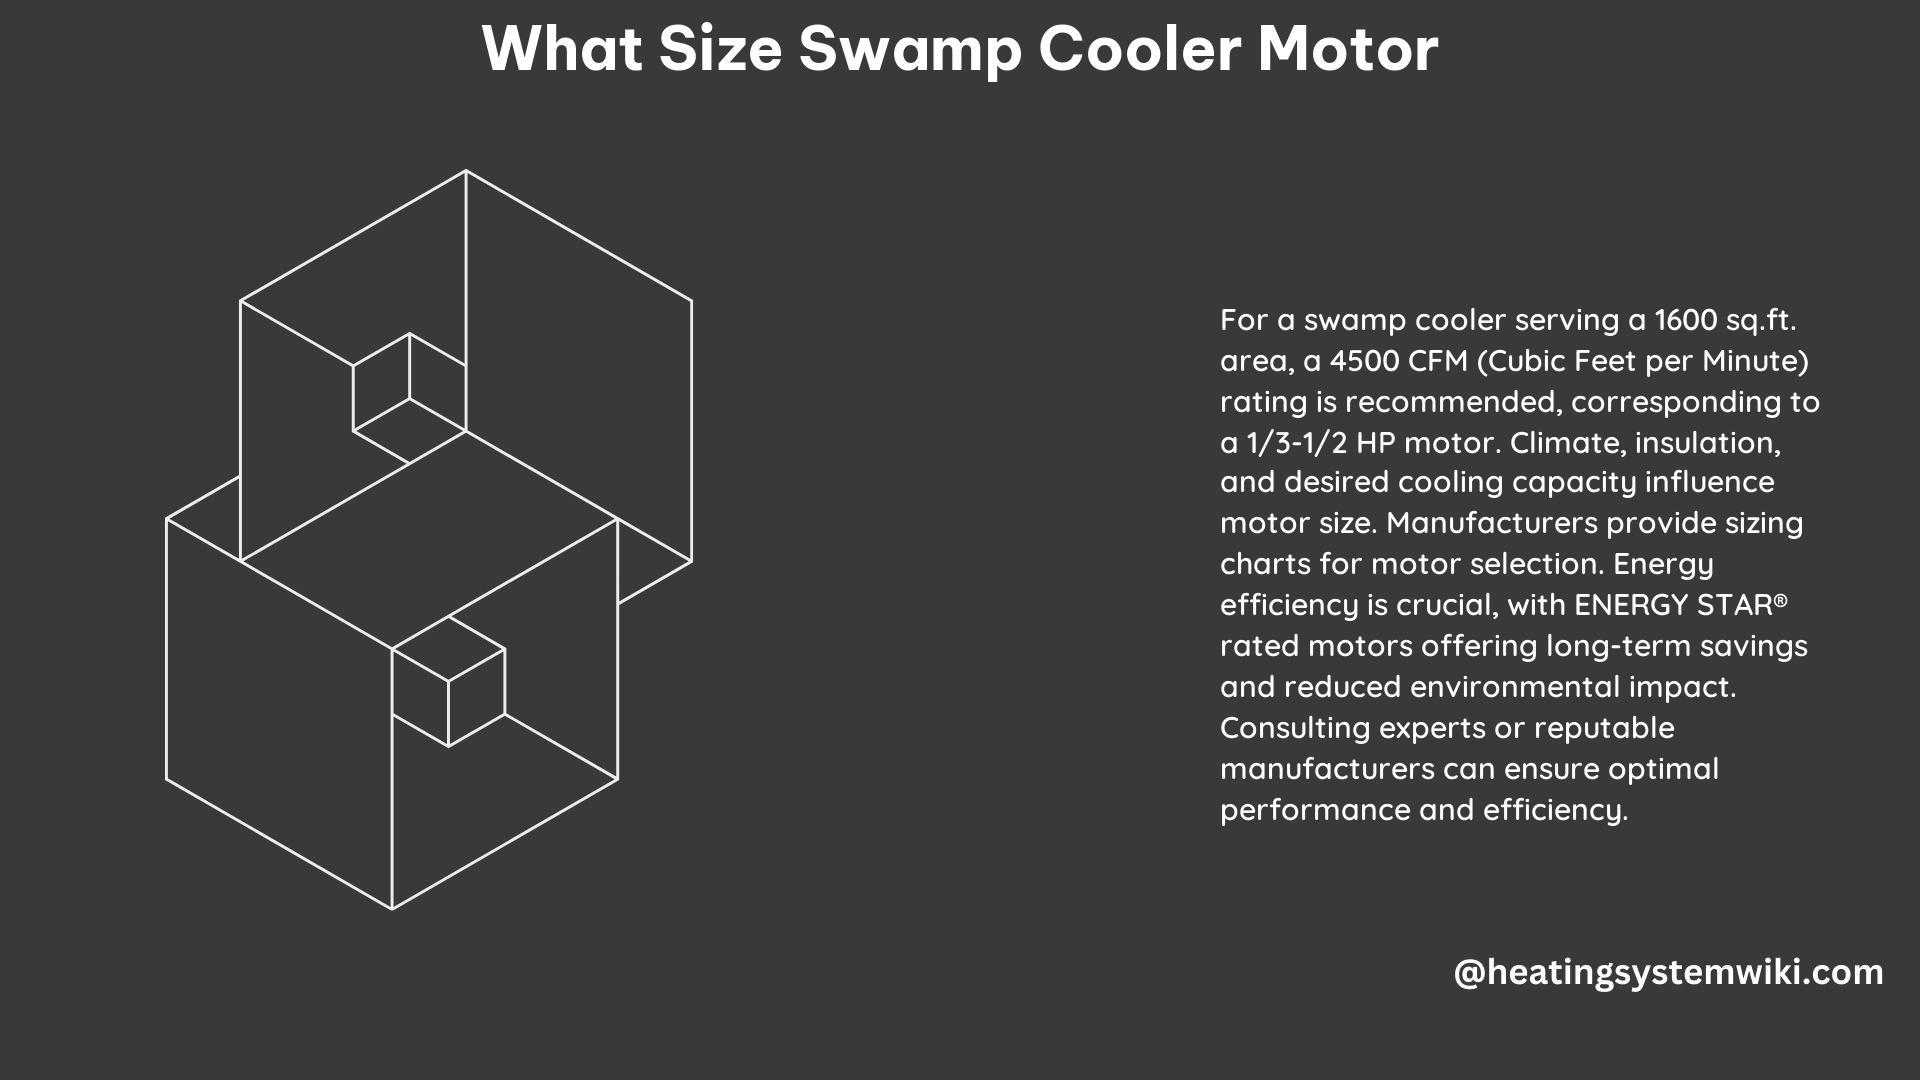 What Size Swamp Cooler Motor